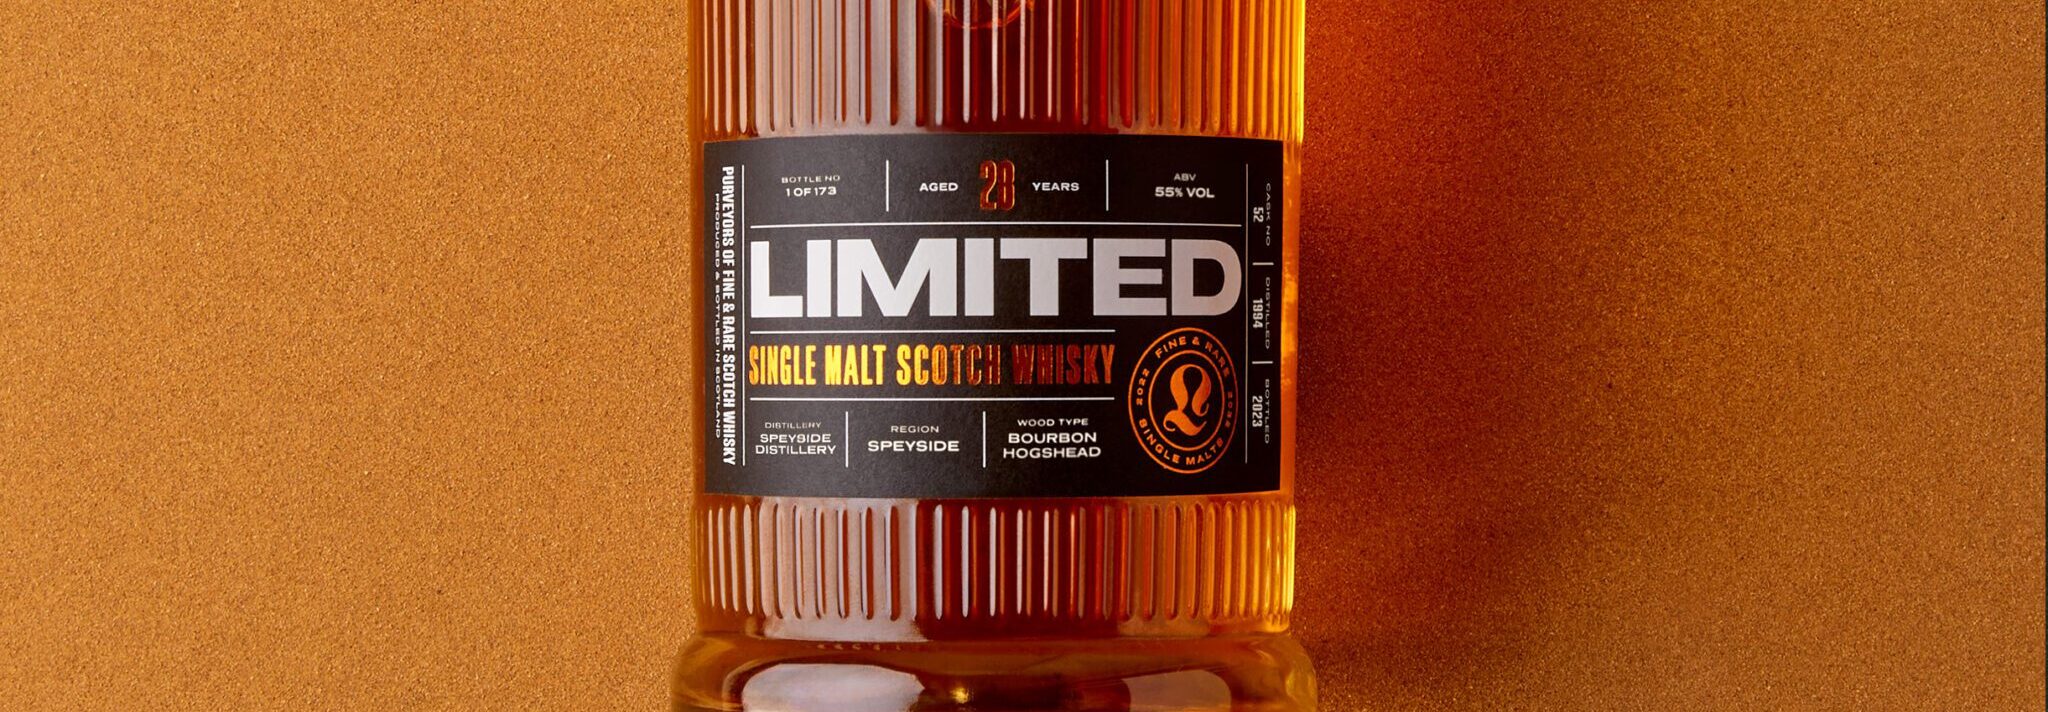 How to Read a Scotch Whisky Label